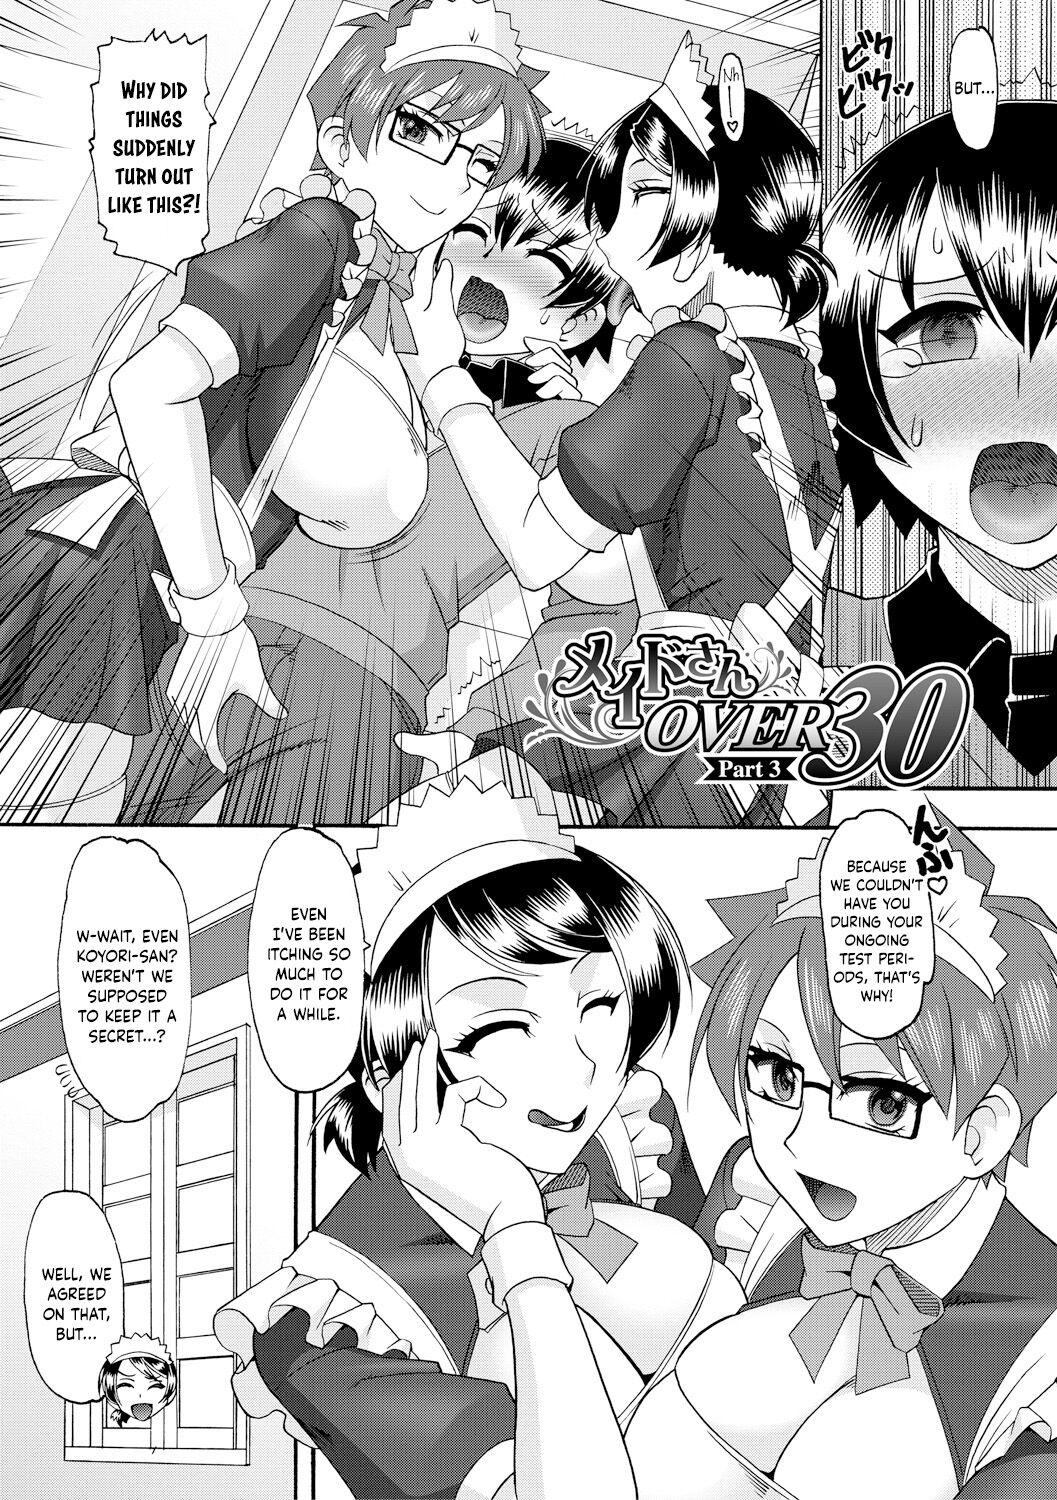 Maid OVER 30 Chapters 1-6 37